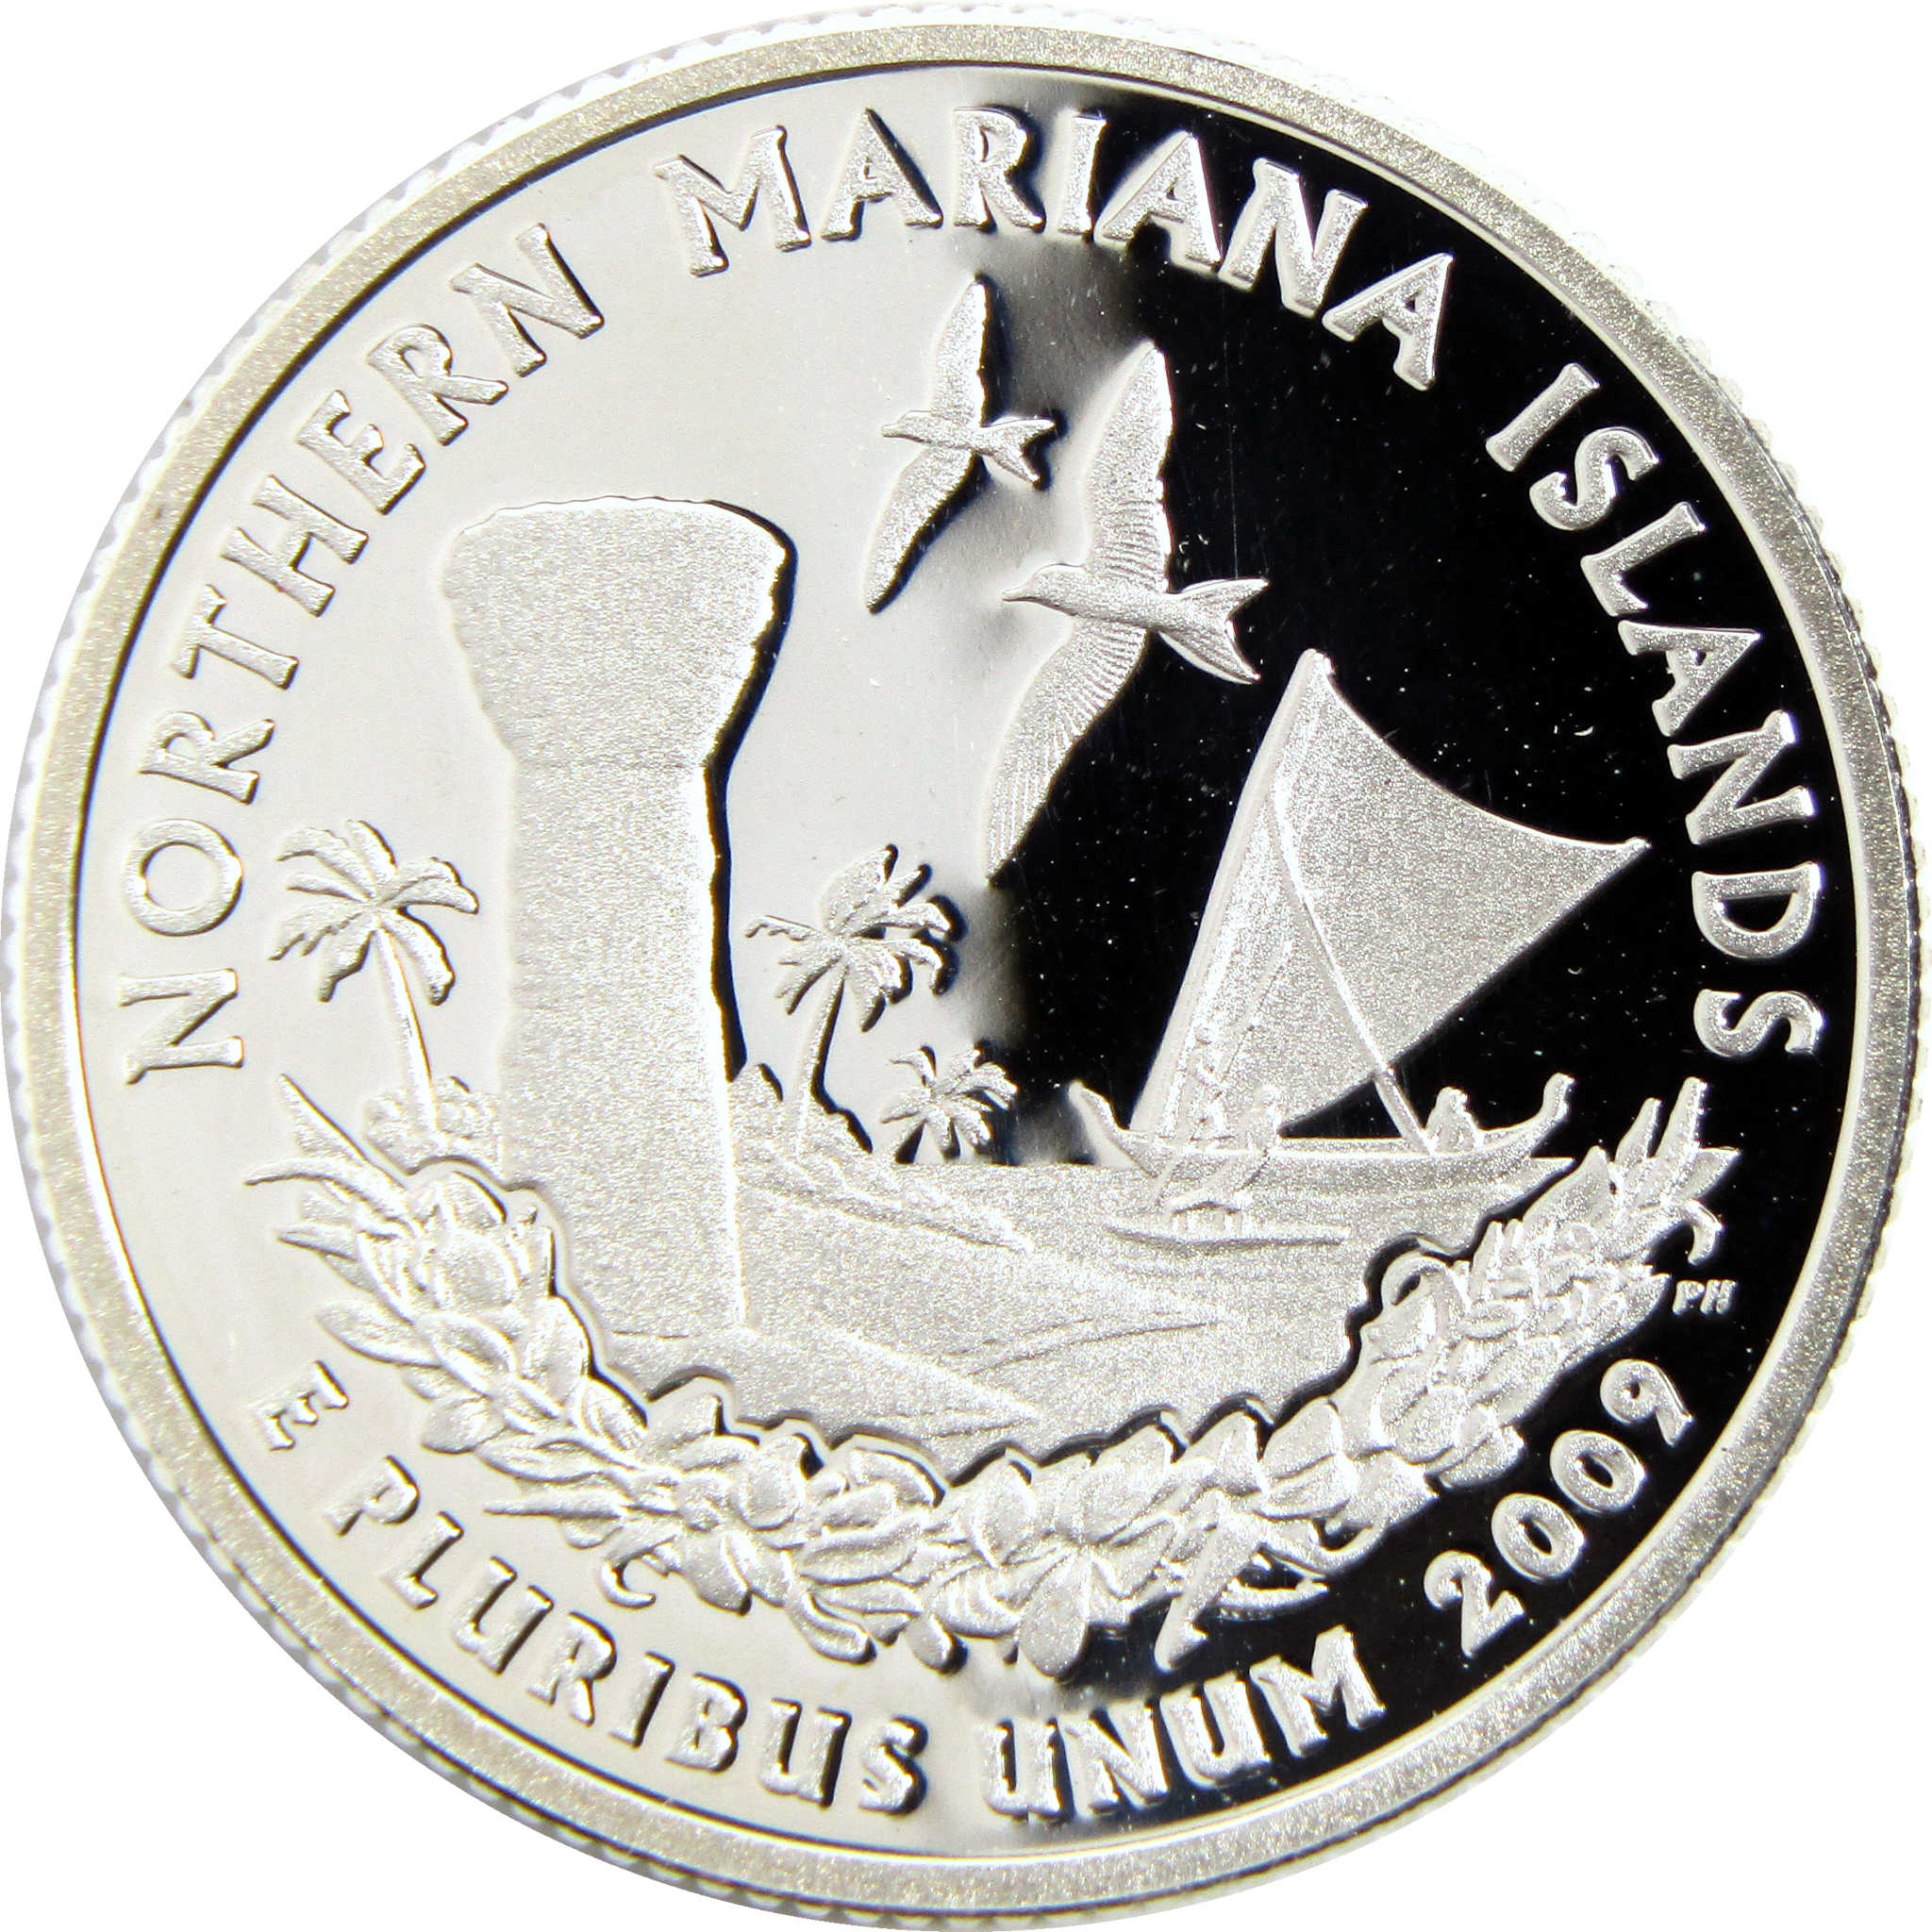 2009 S Northern Mariana Islands US Territories Quarter Silver Proof